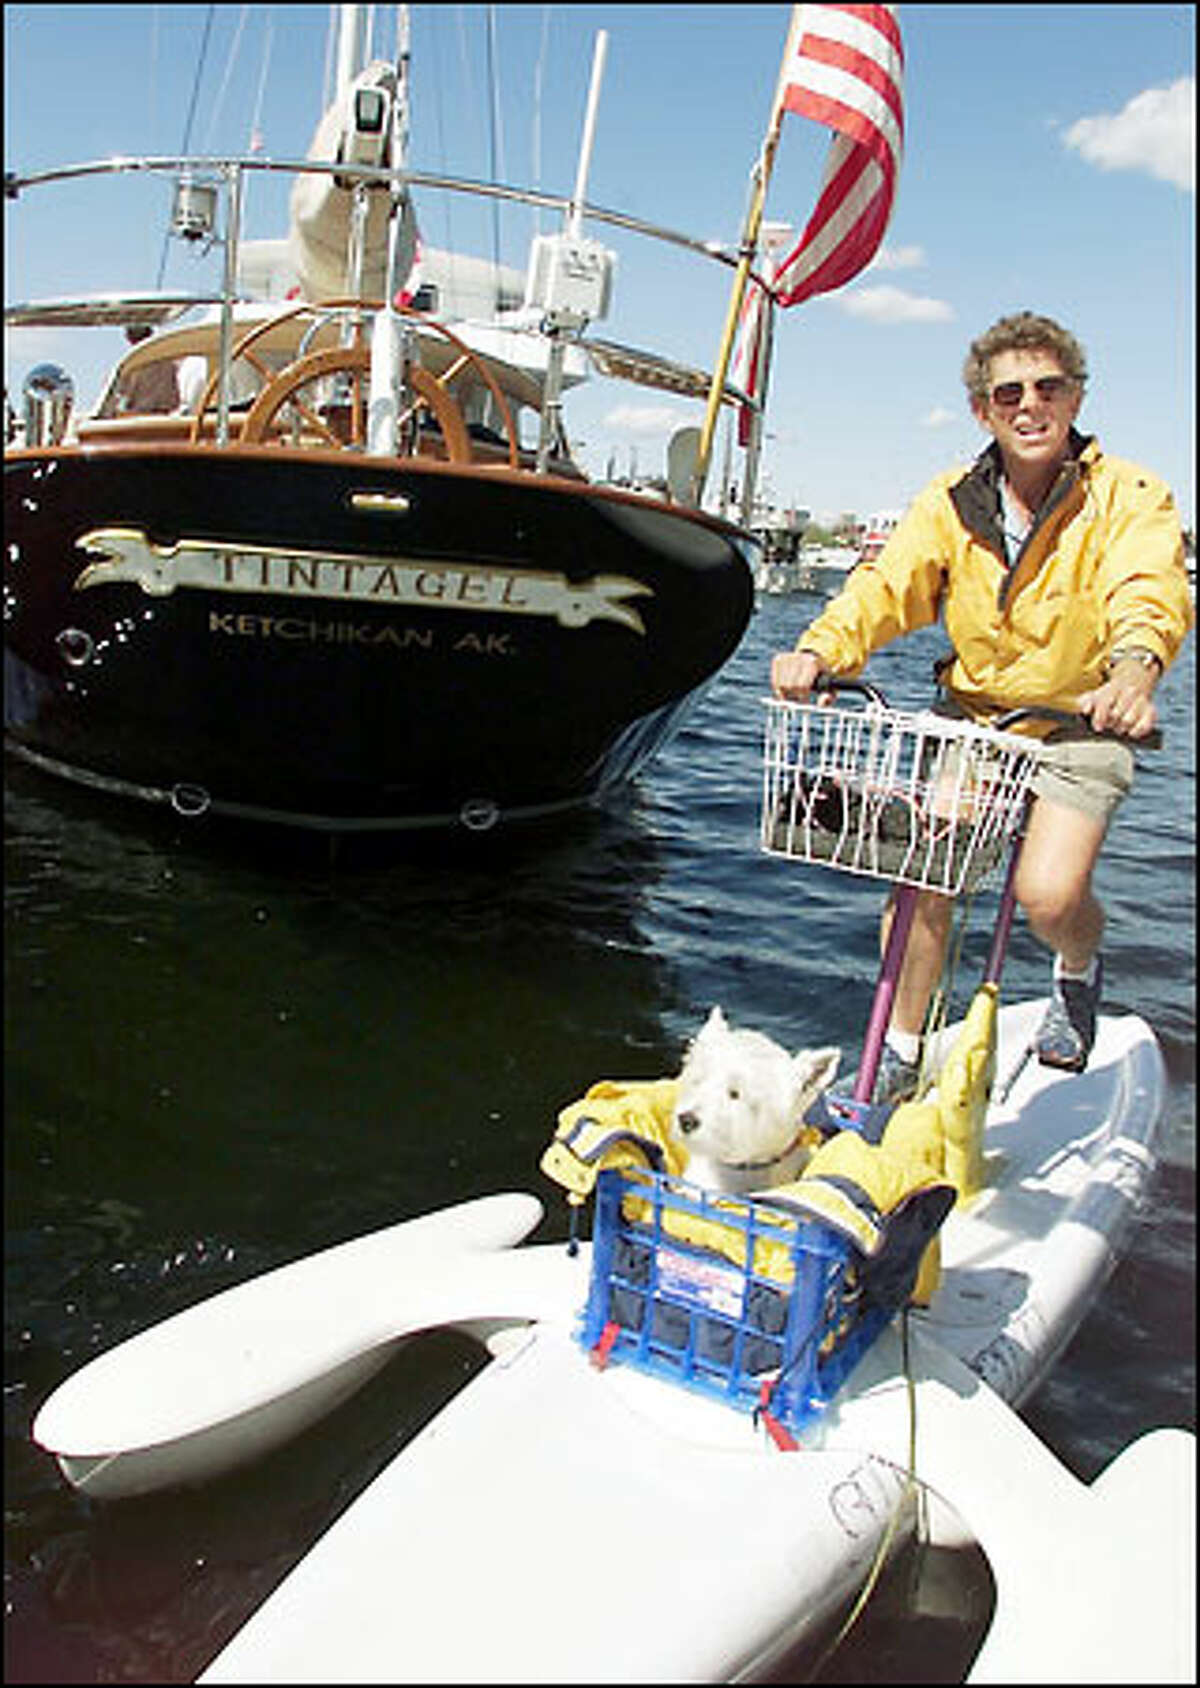 Gordon Myers and his dog Skipper use a surfbike for transport around Lake Union. Yesterday Myers toured the Fleet of Dreams & Superyacht Showcase at Chandler's Cove. The show is open to the public today from 11 a.m. to 7 p.m. and tomorrow and Sunday from 10 a.m. to 7 p.m. Many of the motor cruisers and sailboats that are on display were built in Puget Sound-area shipyards.